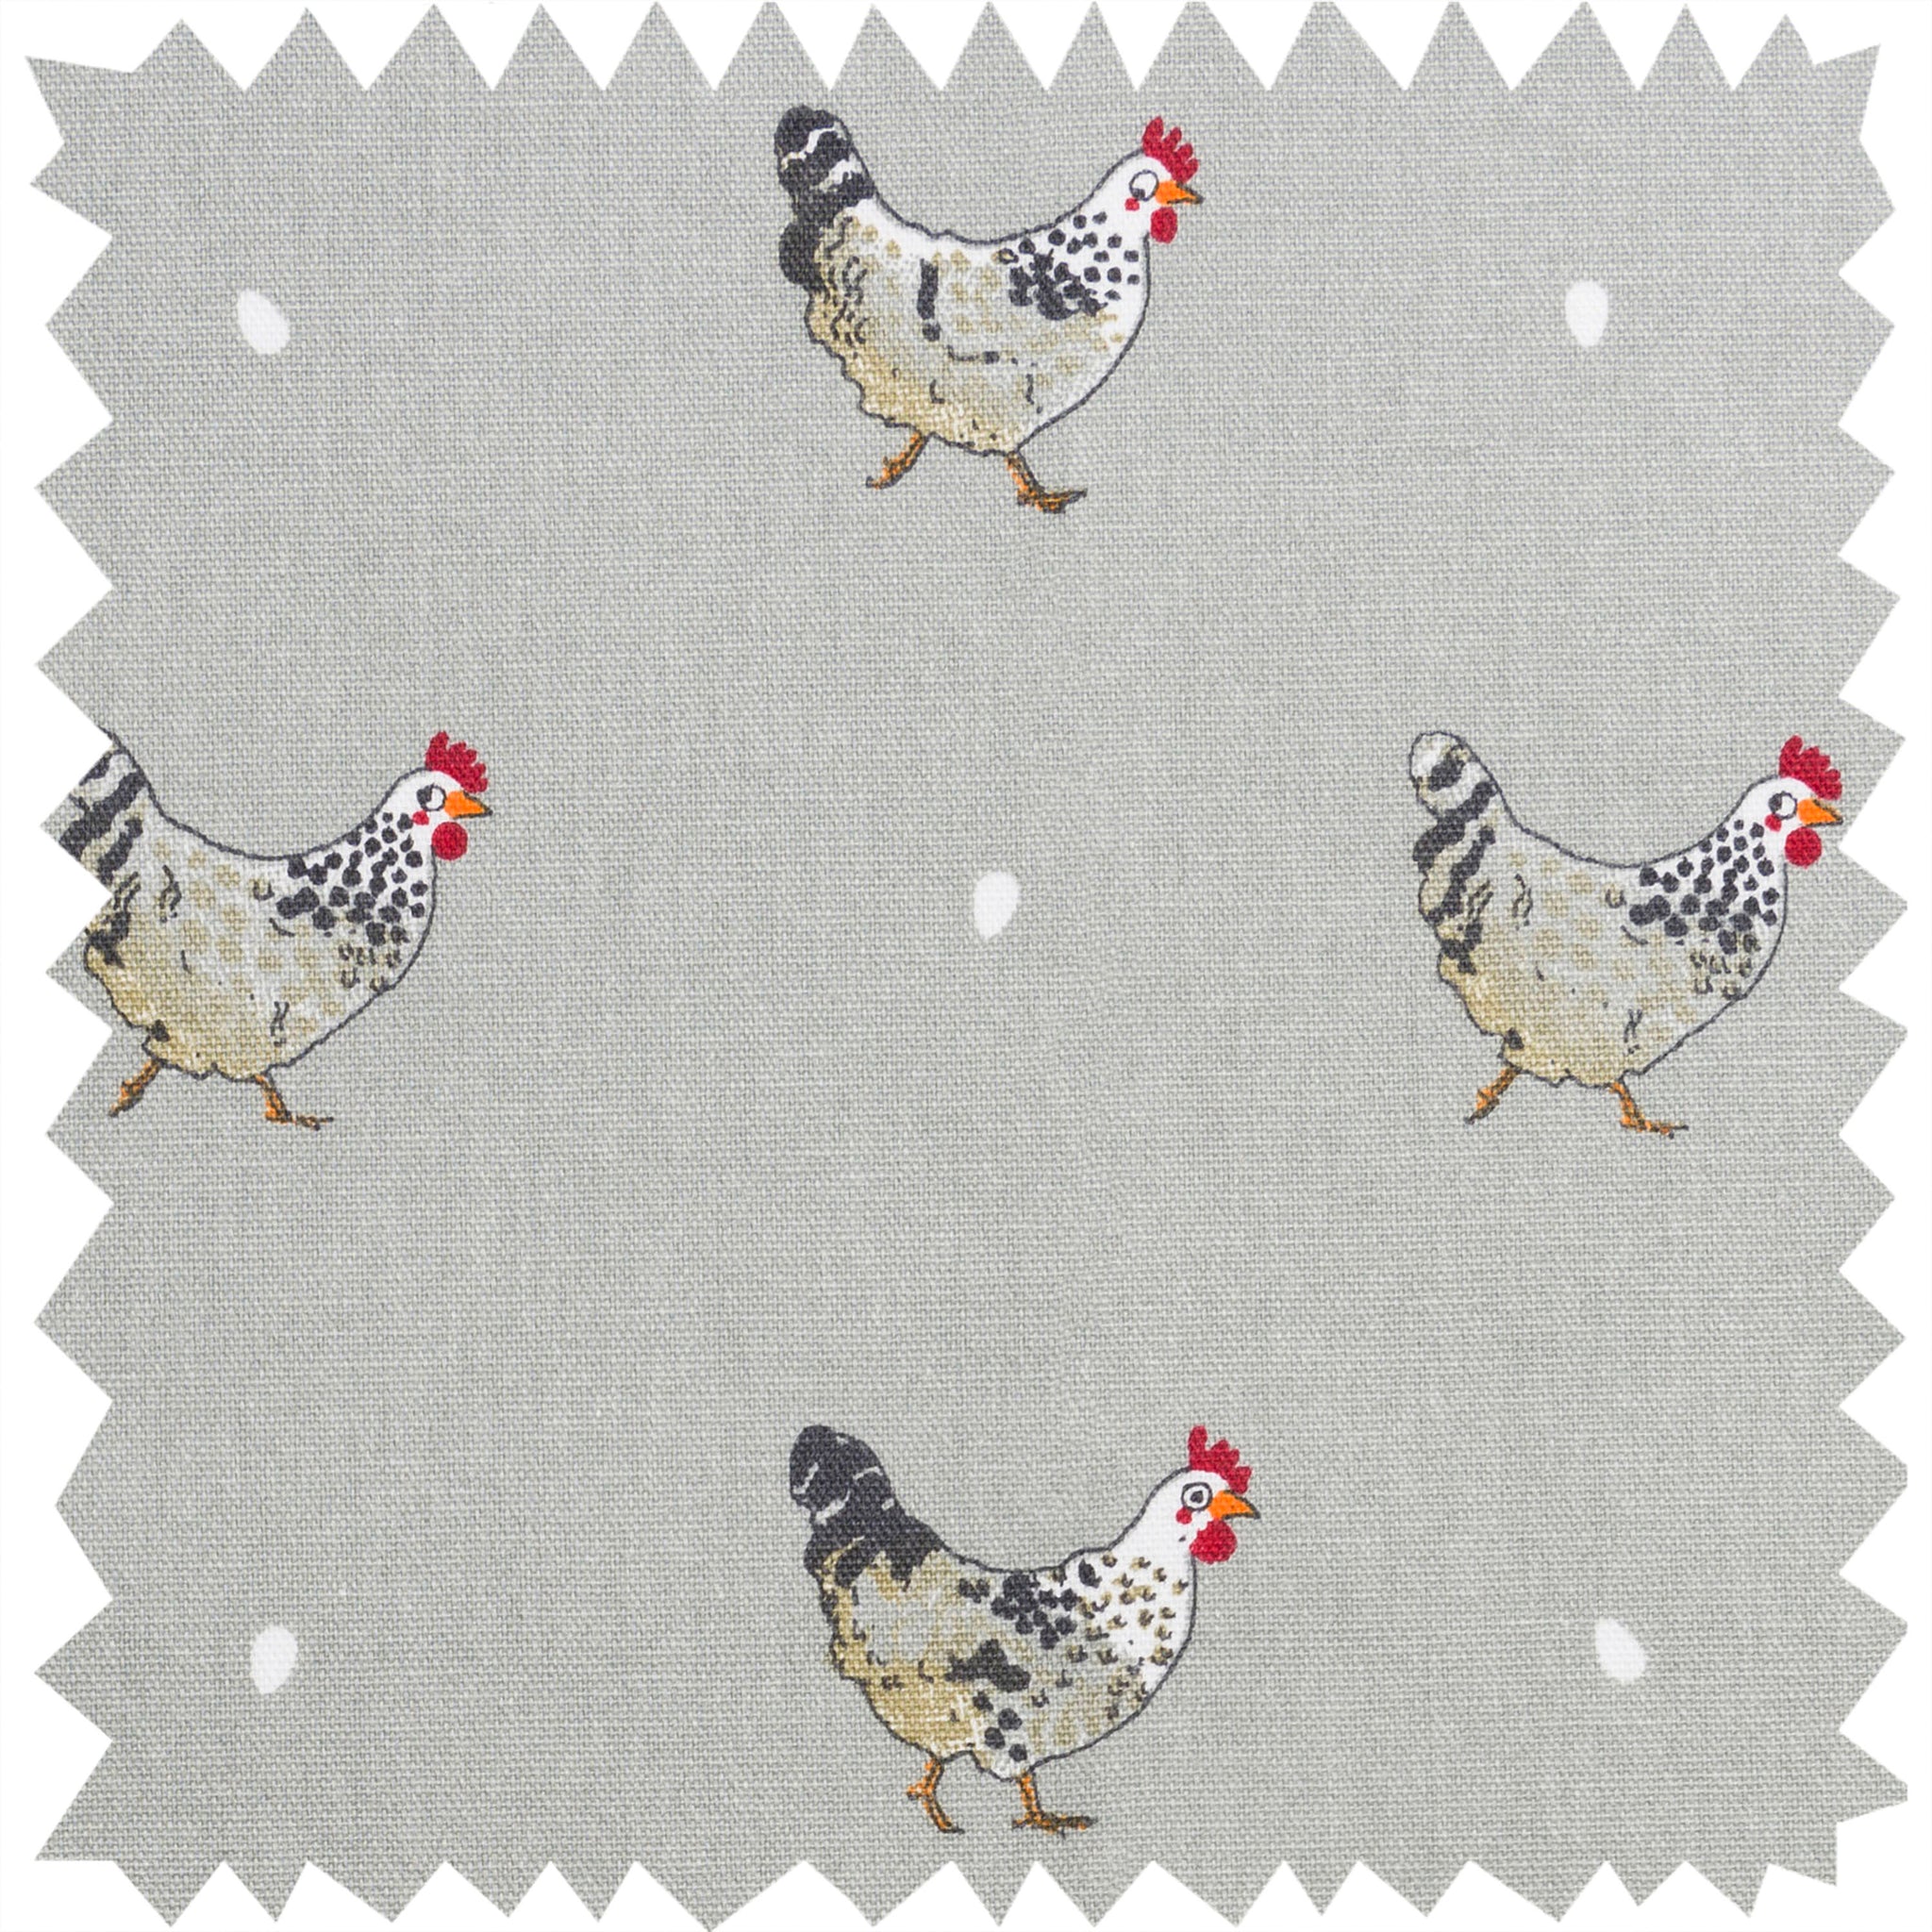 Chicken fabric by the metre, perfect for upholstery, by Sophie Allport